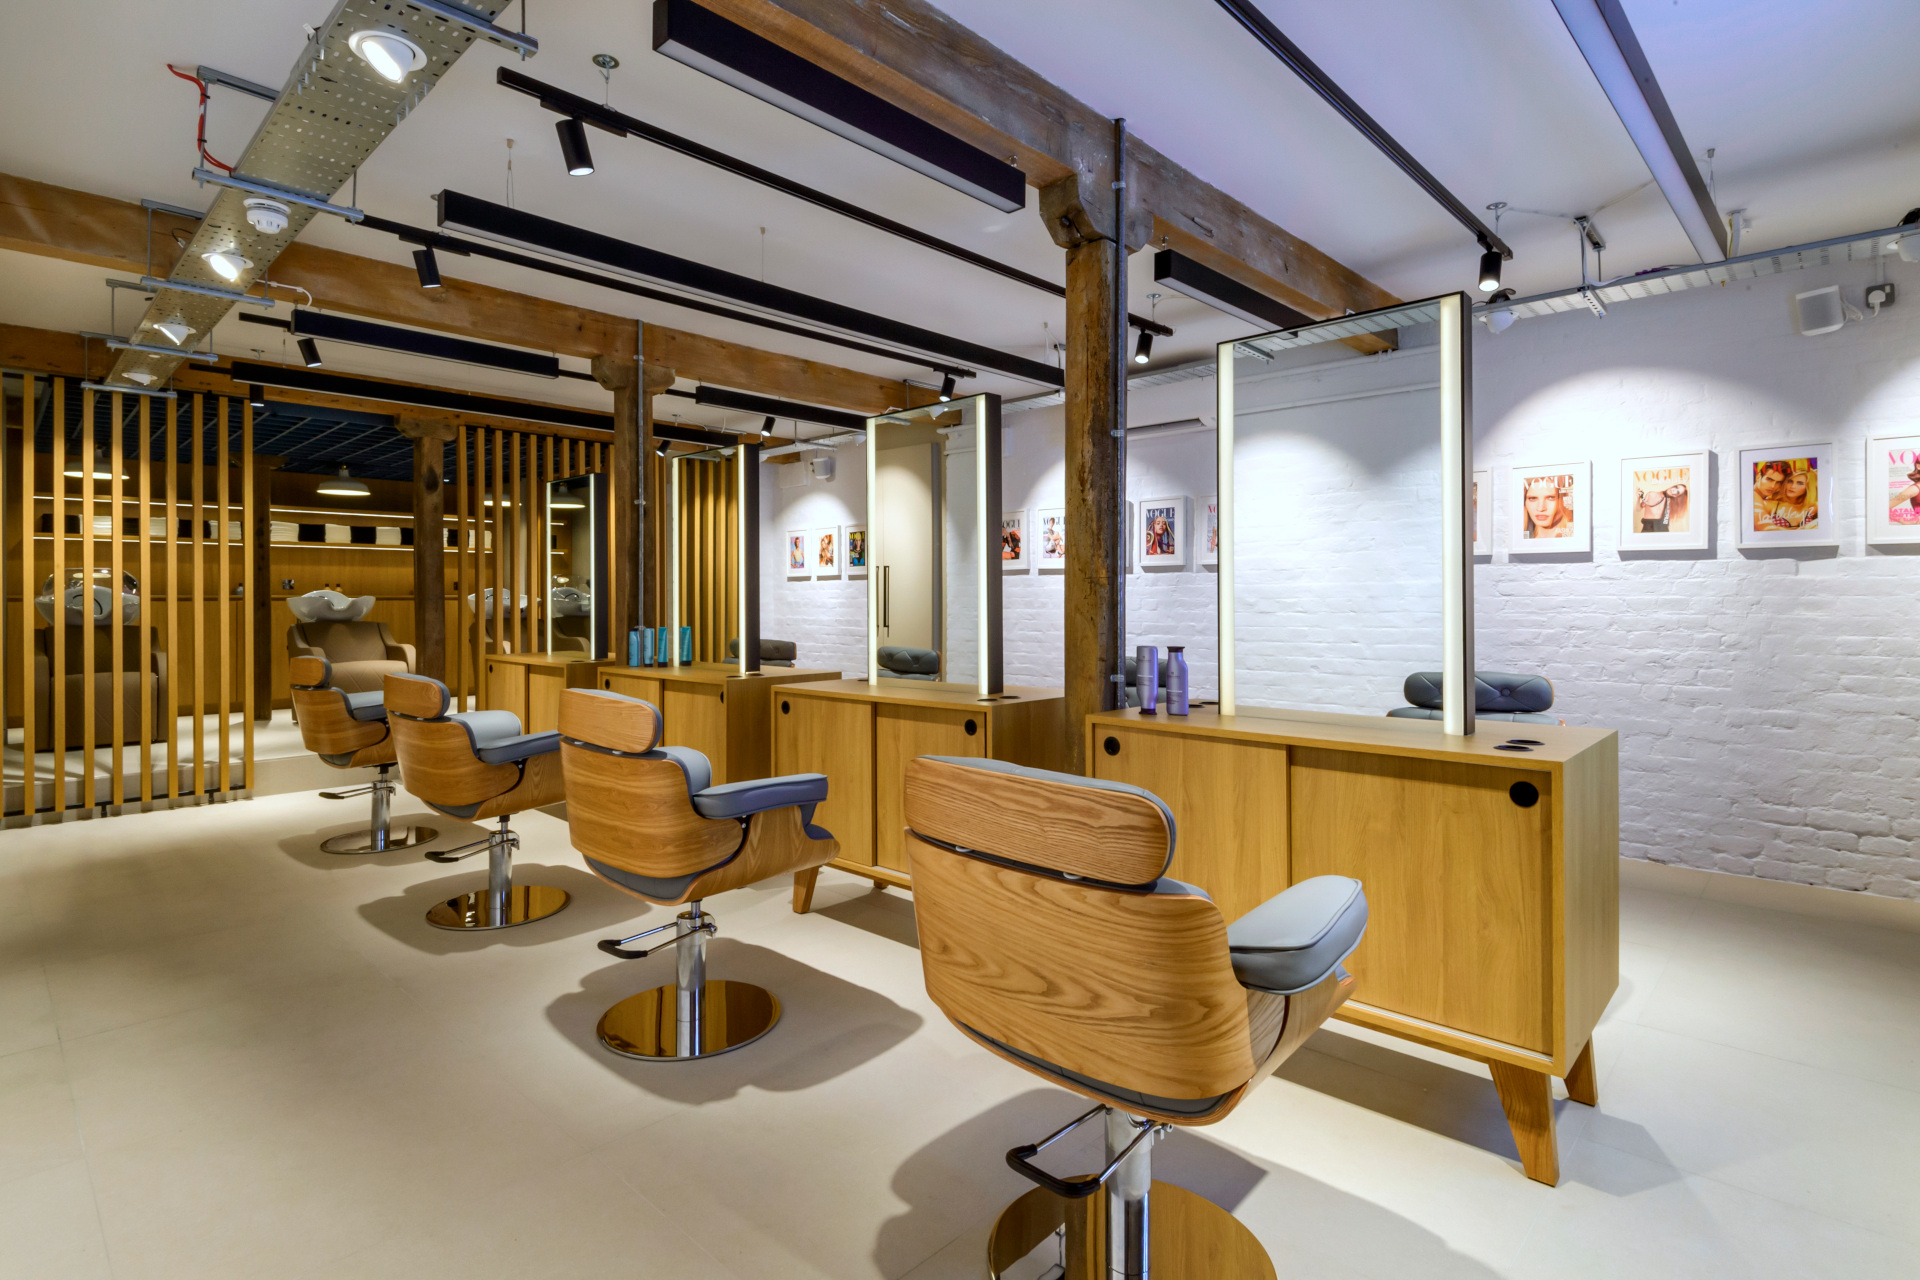 Beauty salon with wooden interiors